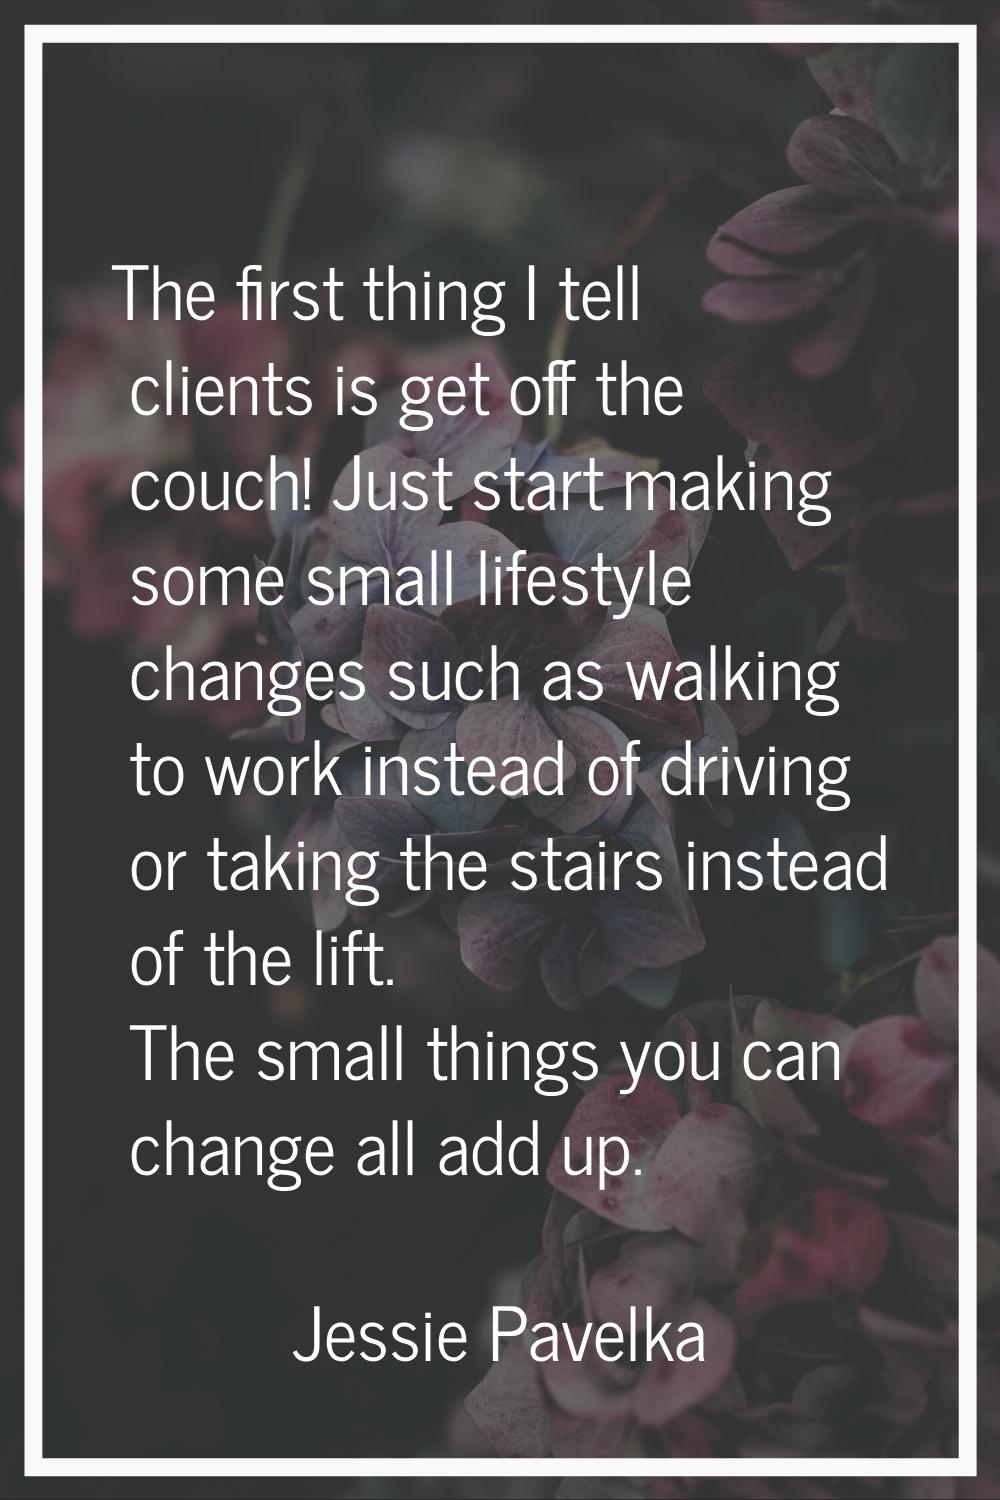 The first thing I tell clients is get off the couch! Just start making some small lifestyle changes